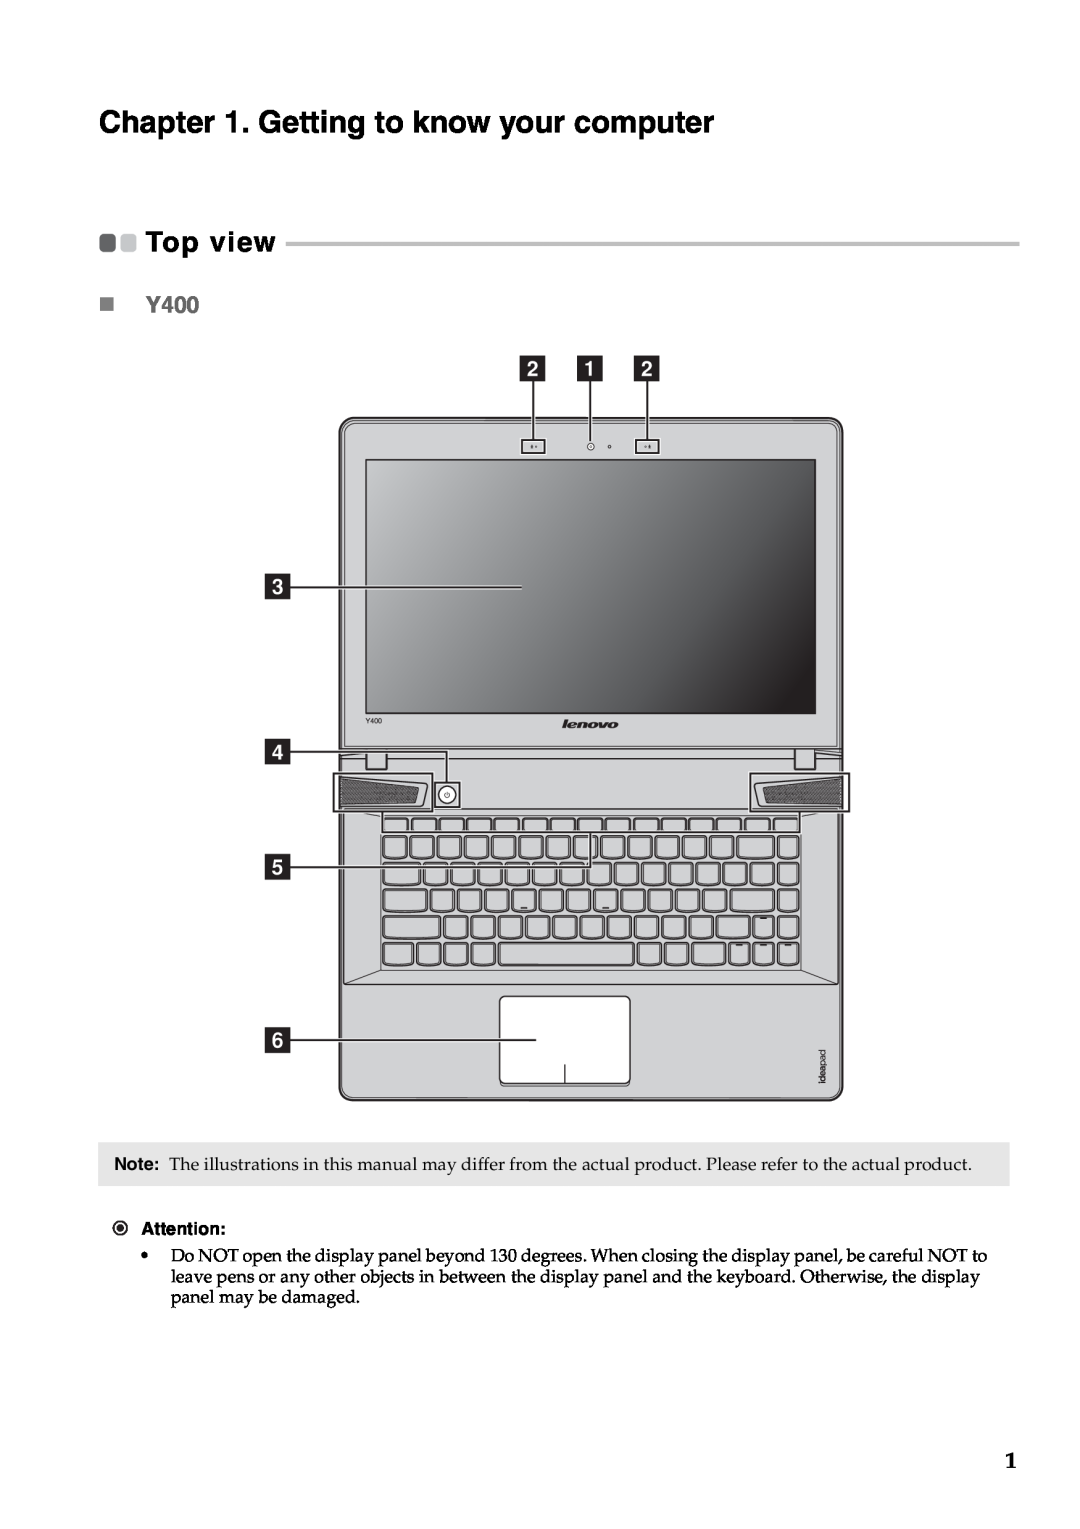 Lenovo Y500 manual Getting to know your computer, b a b, d e f, „ Y400, Top view 